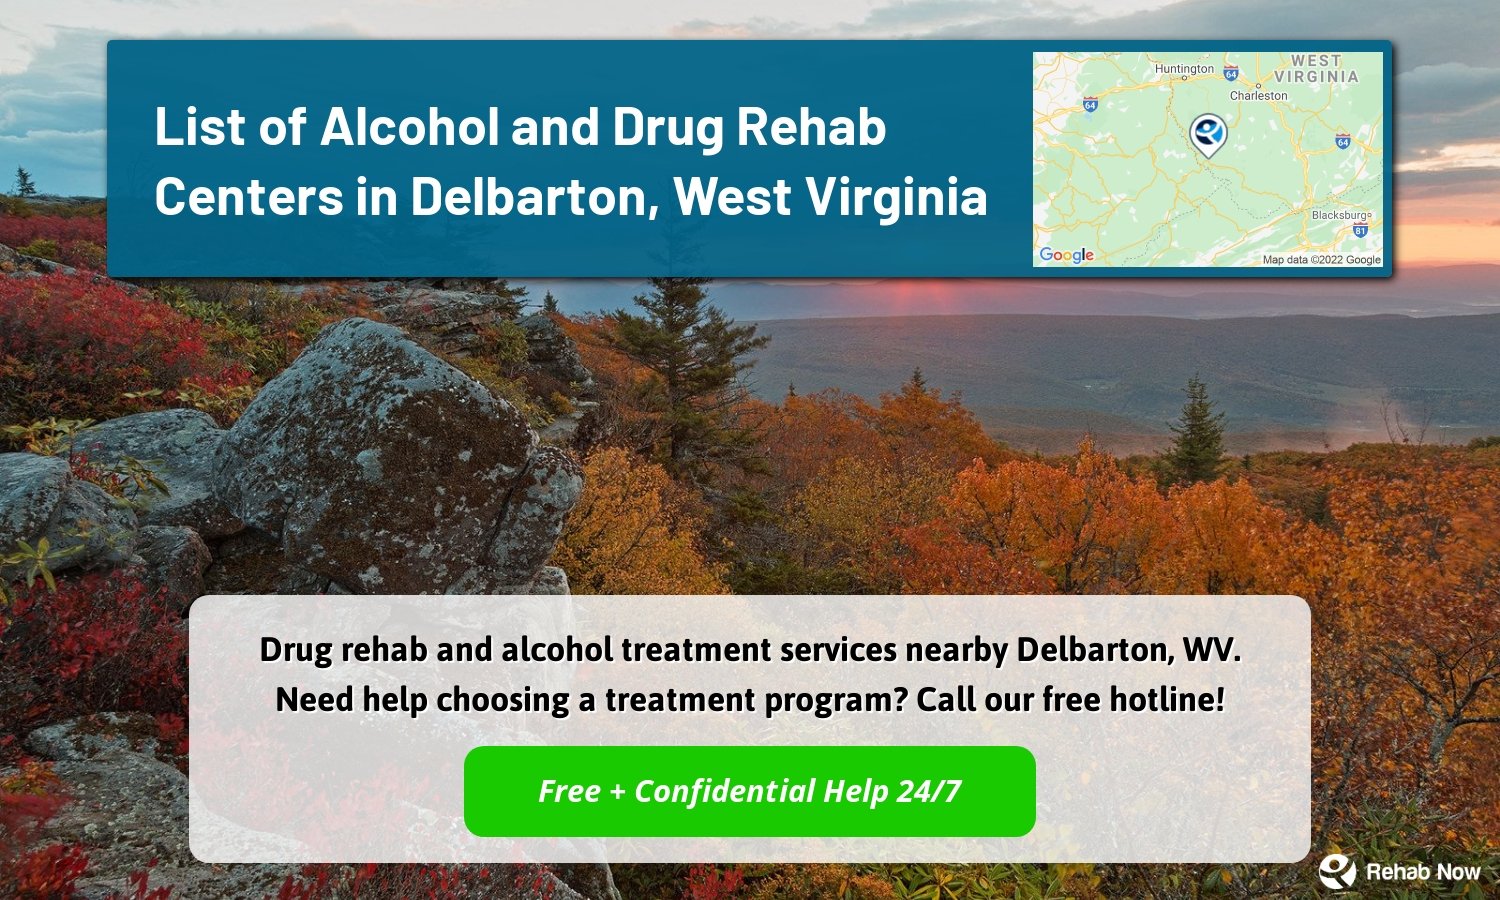 Drug rehab and alcohol treatment services nearby Delbarton, WV. Need help choosing a treatment program? Call our free hotline!